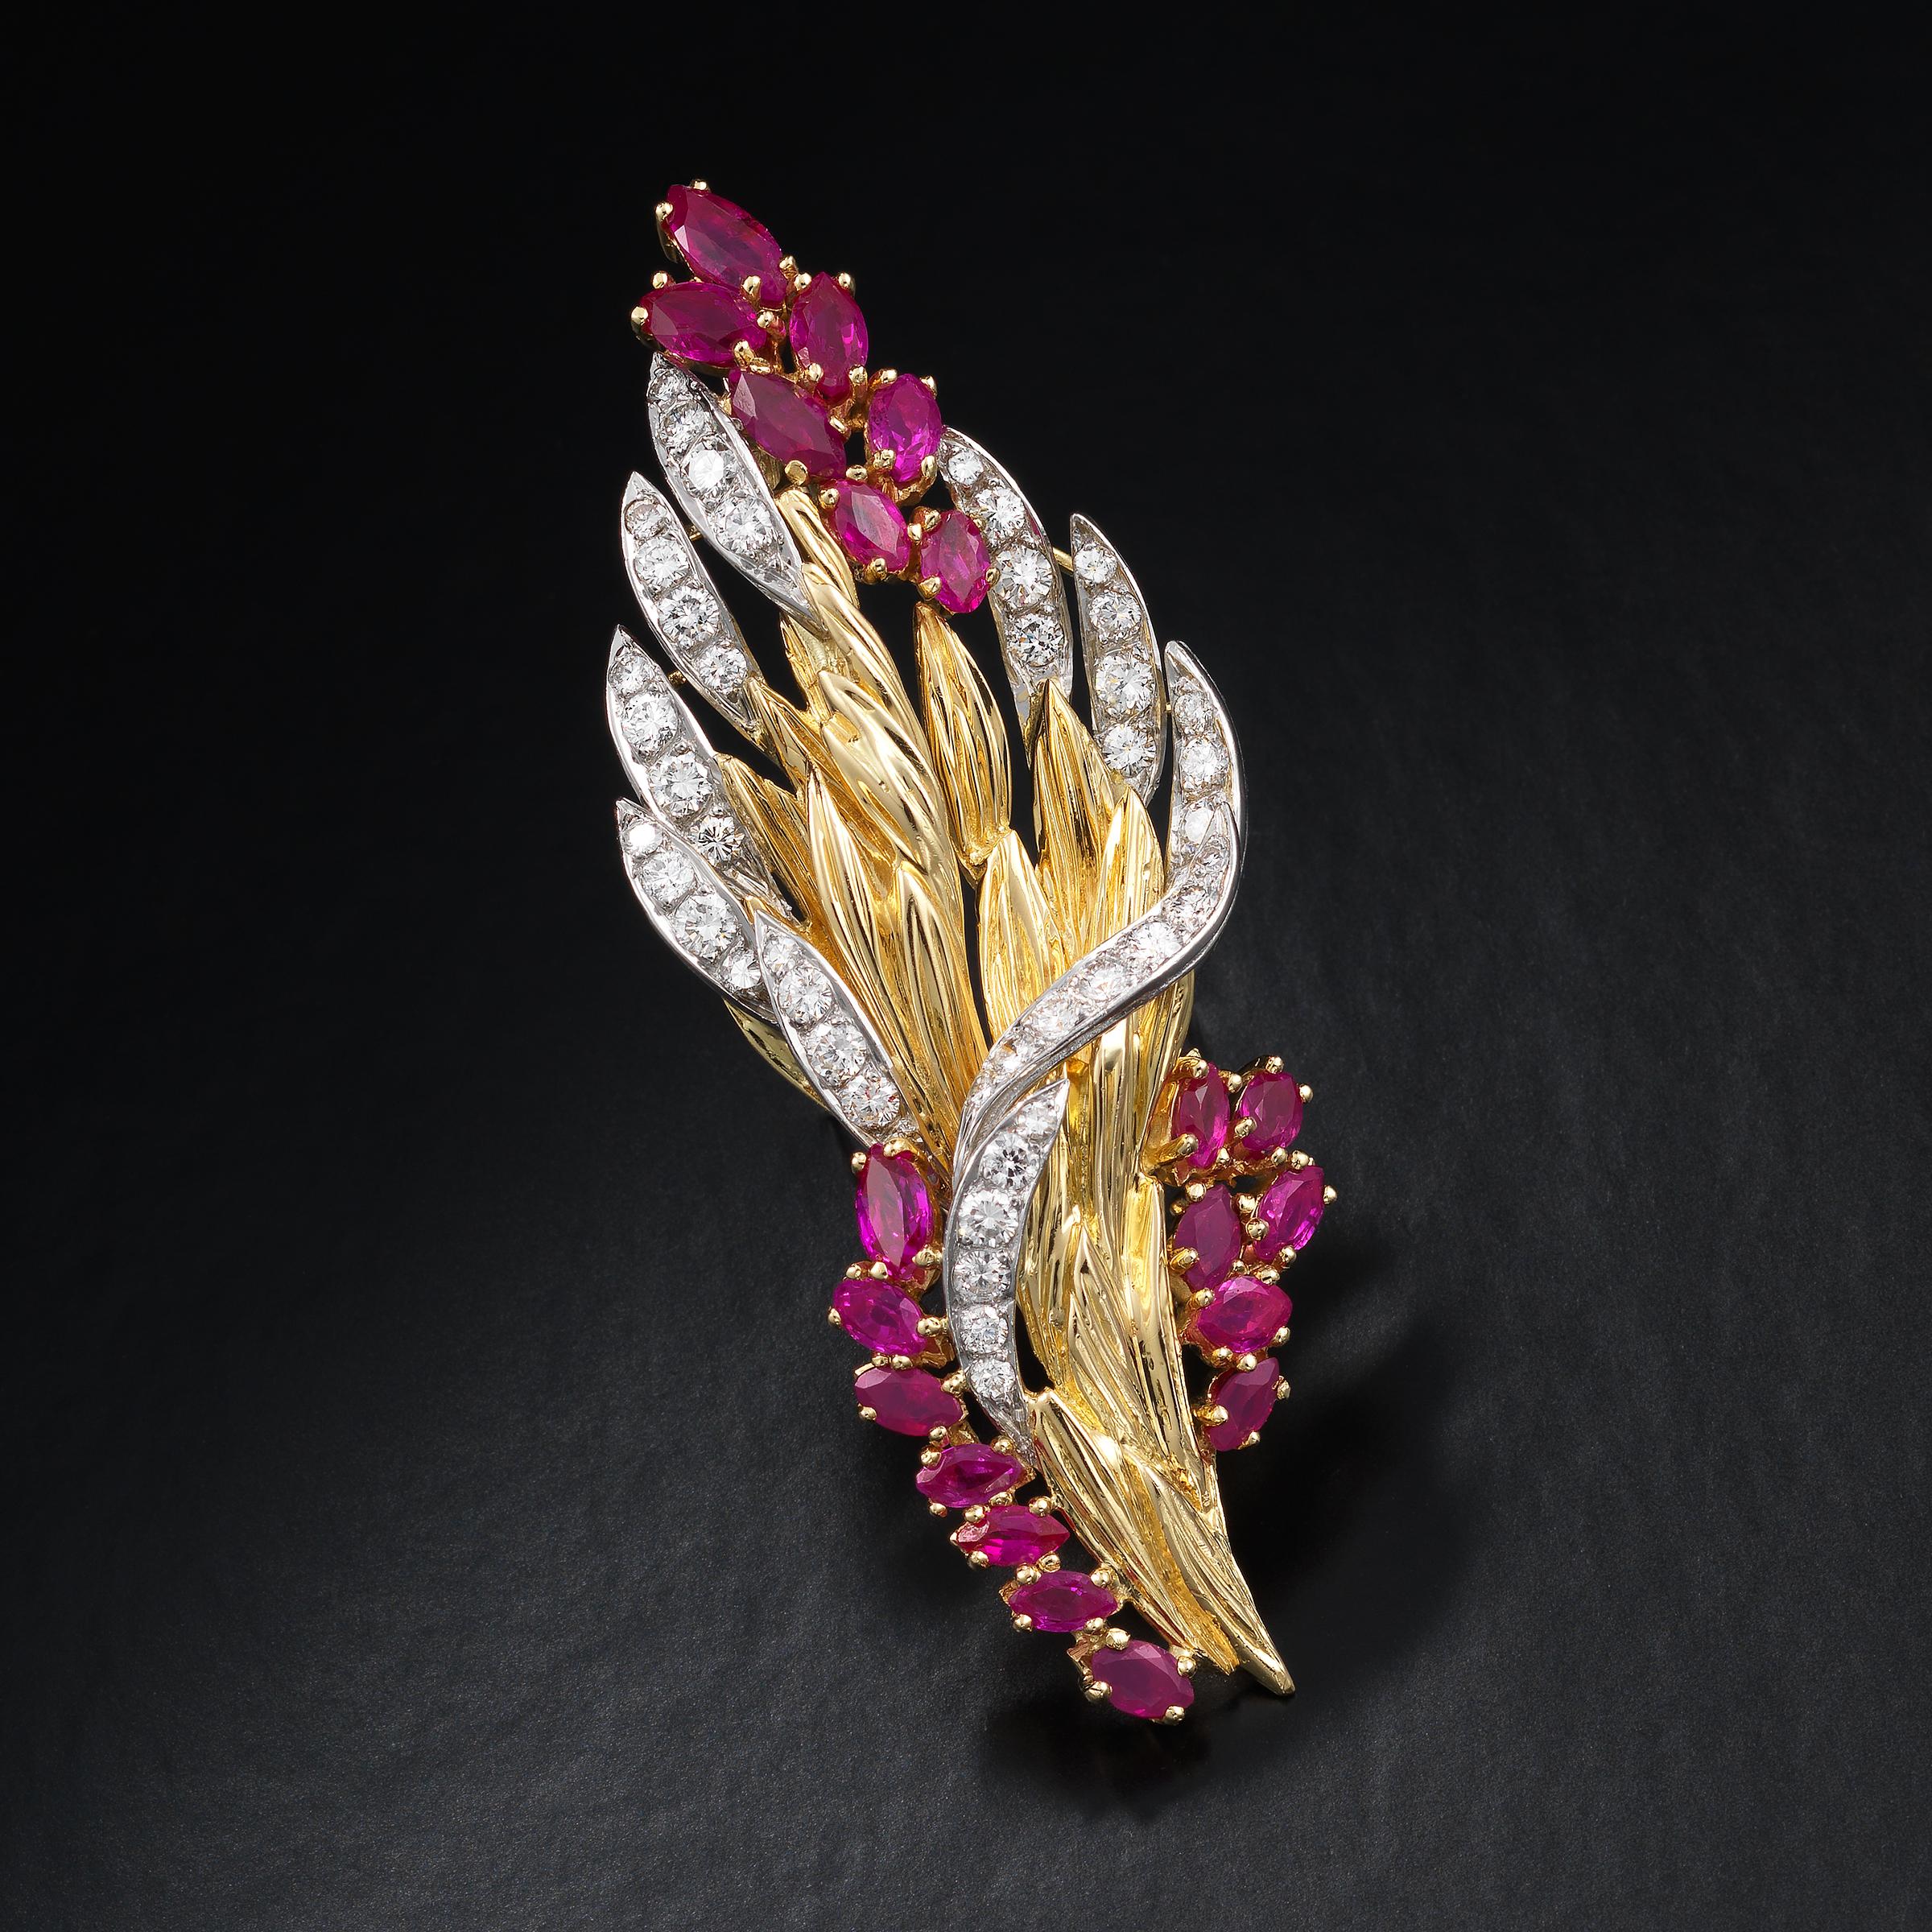 Elegant retro brooch modelled in the form of an enchanting flower bouquet of shimmering gold leaves, glowing ruby flower buds, and glittering diamond accents. The central part of the brooch is rendered in 18 karat yellow gold which is also the